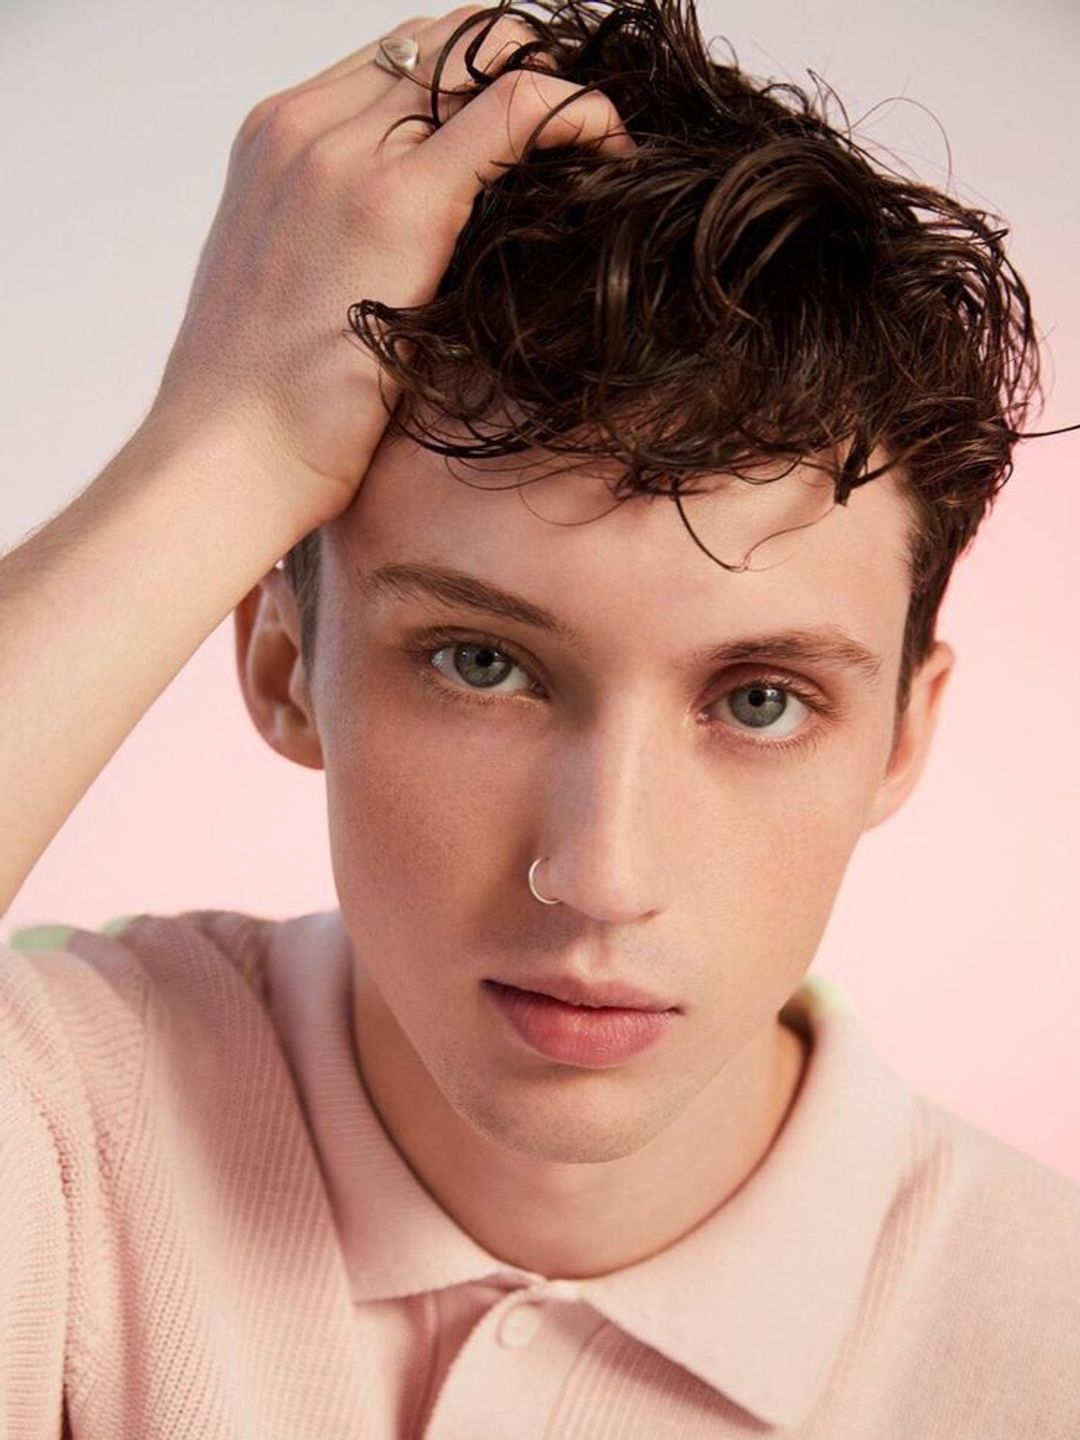 Troye Sivan in real life